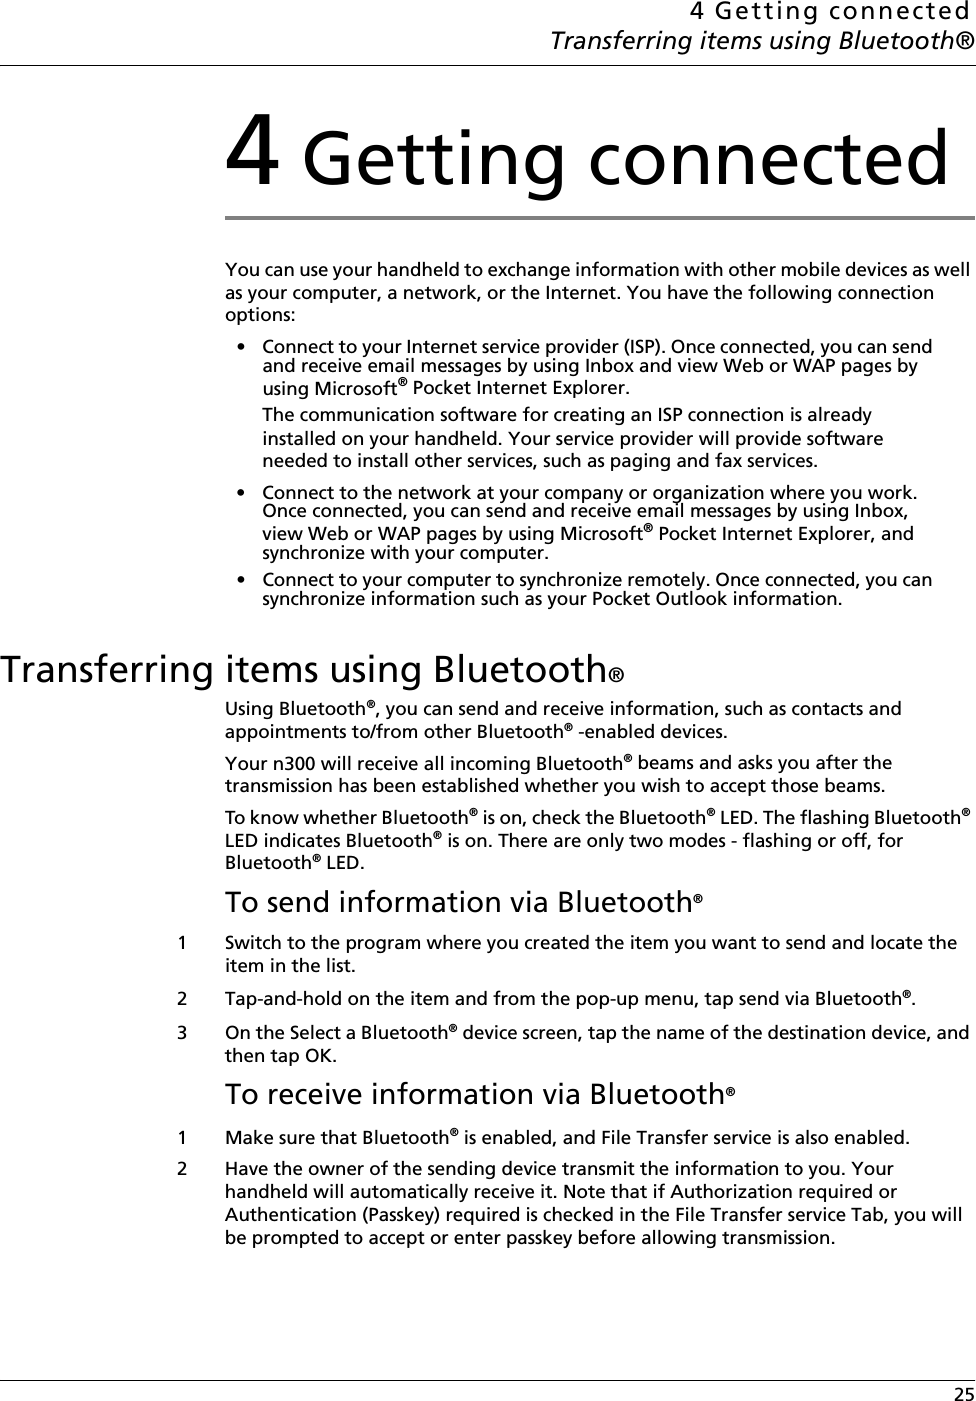 4 Getting connectedTransferring items using Bluetooth® 254 Getting connectedYou can use your handheld to exchange information with other mobile devices as well as your computer, a network, or the Internet. You have the following connection options:• Connect to your Internet service provider (ISP). Once connected, you can send and receive email messages by using Inbox and view Web or WAP pages by using Microsoft® Pocket Internet Explorer. The communication software for creating an ISP connection is already installed on your handheld. Your service provider will provide software needed to install other services, such as paging and fax services. • Connect to the network at your company or organization where you work. Once connected, you can send and receive email messages by using Inbox, view Web or WAP pages by using Microsoft® Pocket Internet Explorer, and synchronize with your computer. • Connect to your computer to synchronize remotely. Once connected, you can synchronize information such as your Pocket Outlook information. Transferring items using Bluetooth® Using Bluetooth®, you can send and receive information, such as contacts and appointments to/from other Bluetooth® -enabled devices.Your n300 will receive all incoming Bluetooth® beams and asks you after the transmission has been established whether you wish to accept those beams. To know whether Bluetooth® is on, check the Bluetooth® LED. The flashing Bluetooth® LED indicates Bluetooth® is on. There are only two modes - flashing or off, for Bluetooth® LED. To send information via Bluetooth® 1 Switch to the program where you created the item you want to send and locate the item in the list.2 Tap-and-hold on the item and from the pop-up menu, tap send via Bluetooth®.3On the Select a Bluetooth® device screen, tap the name of the destination device, and then tap OK.To receive information via Bluetooth® 1 Make sure that Bluetooth® is enabled, and File Transfer service is also enabled. 2 Have the owner of the sending device transmit the information to you. Your handheld will automatically receive it. Note that if Authorization required or Authentication (Passkey) required is checked in the File Transfer service Tab, you will be prompted to accept or enter passkey before allowing transmission.